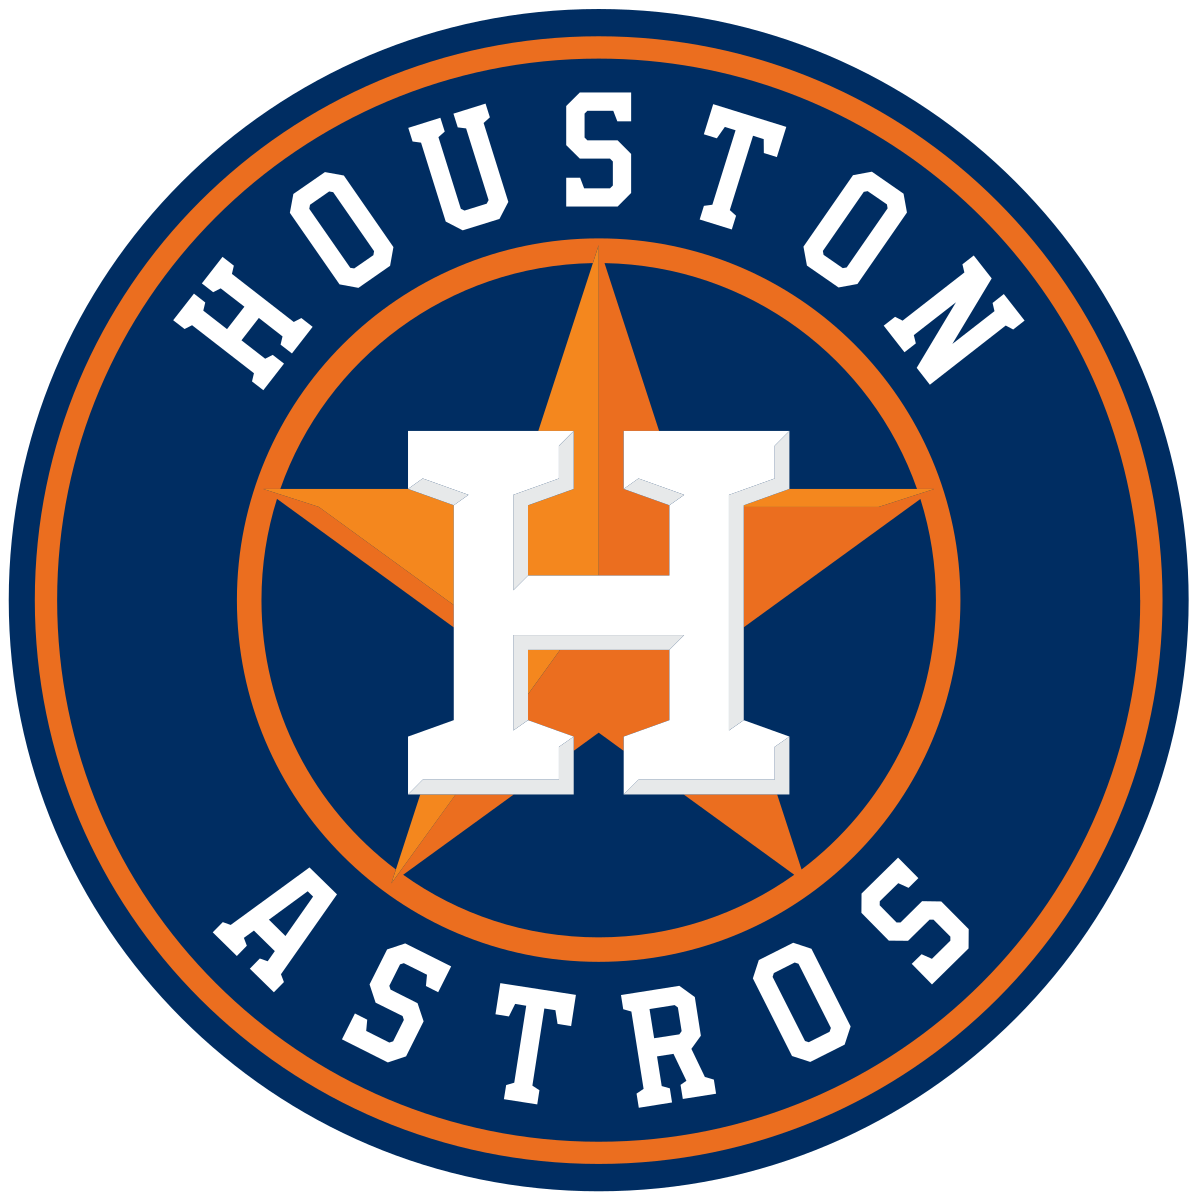 Astros Shatter Sales Record with Space City Jersey Launch